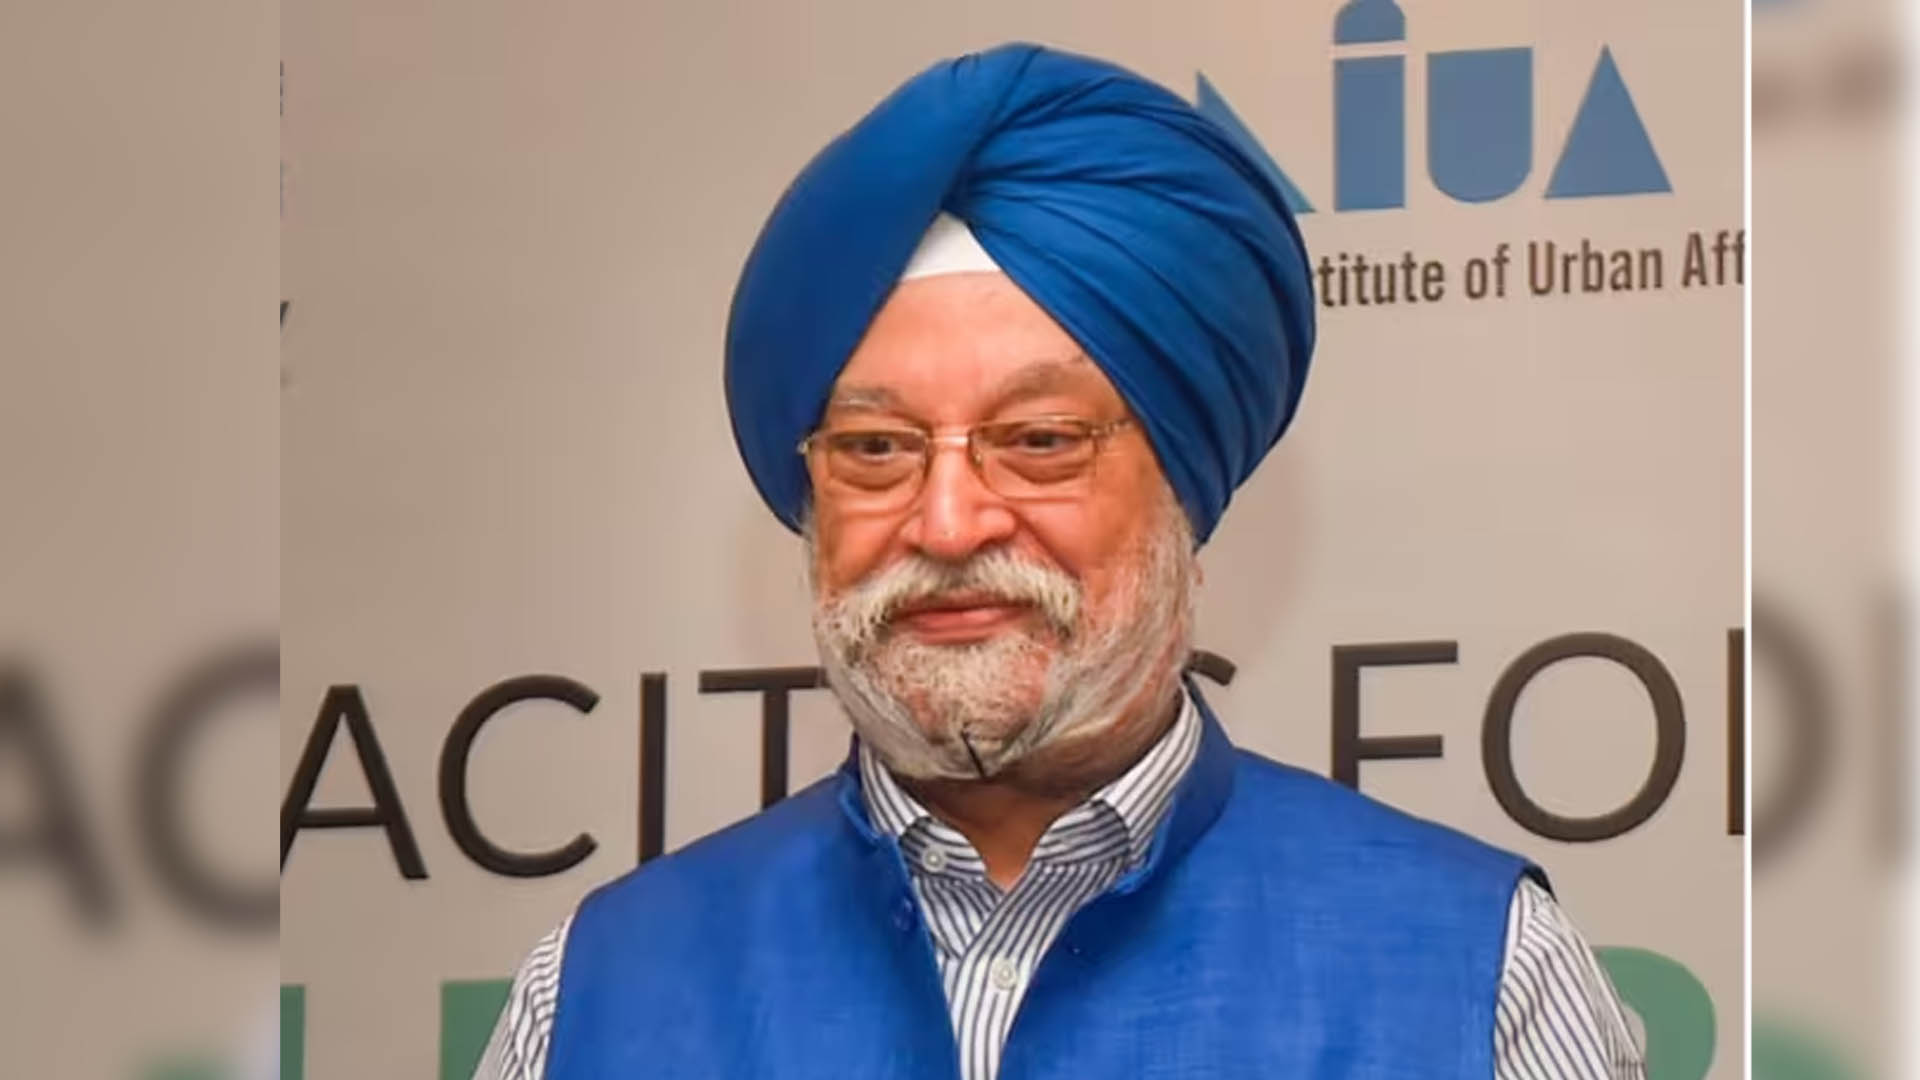 Previous govts had no policy to handle urbanisation, energy requirements: Union minister Puri